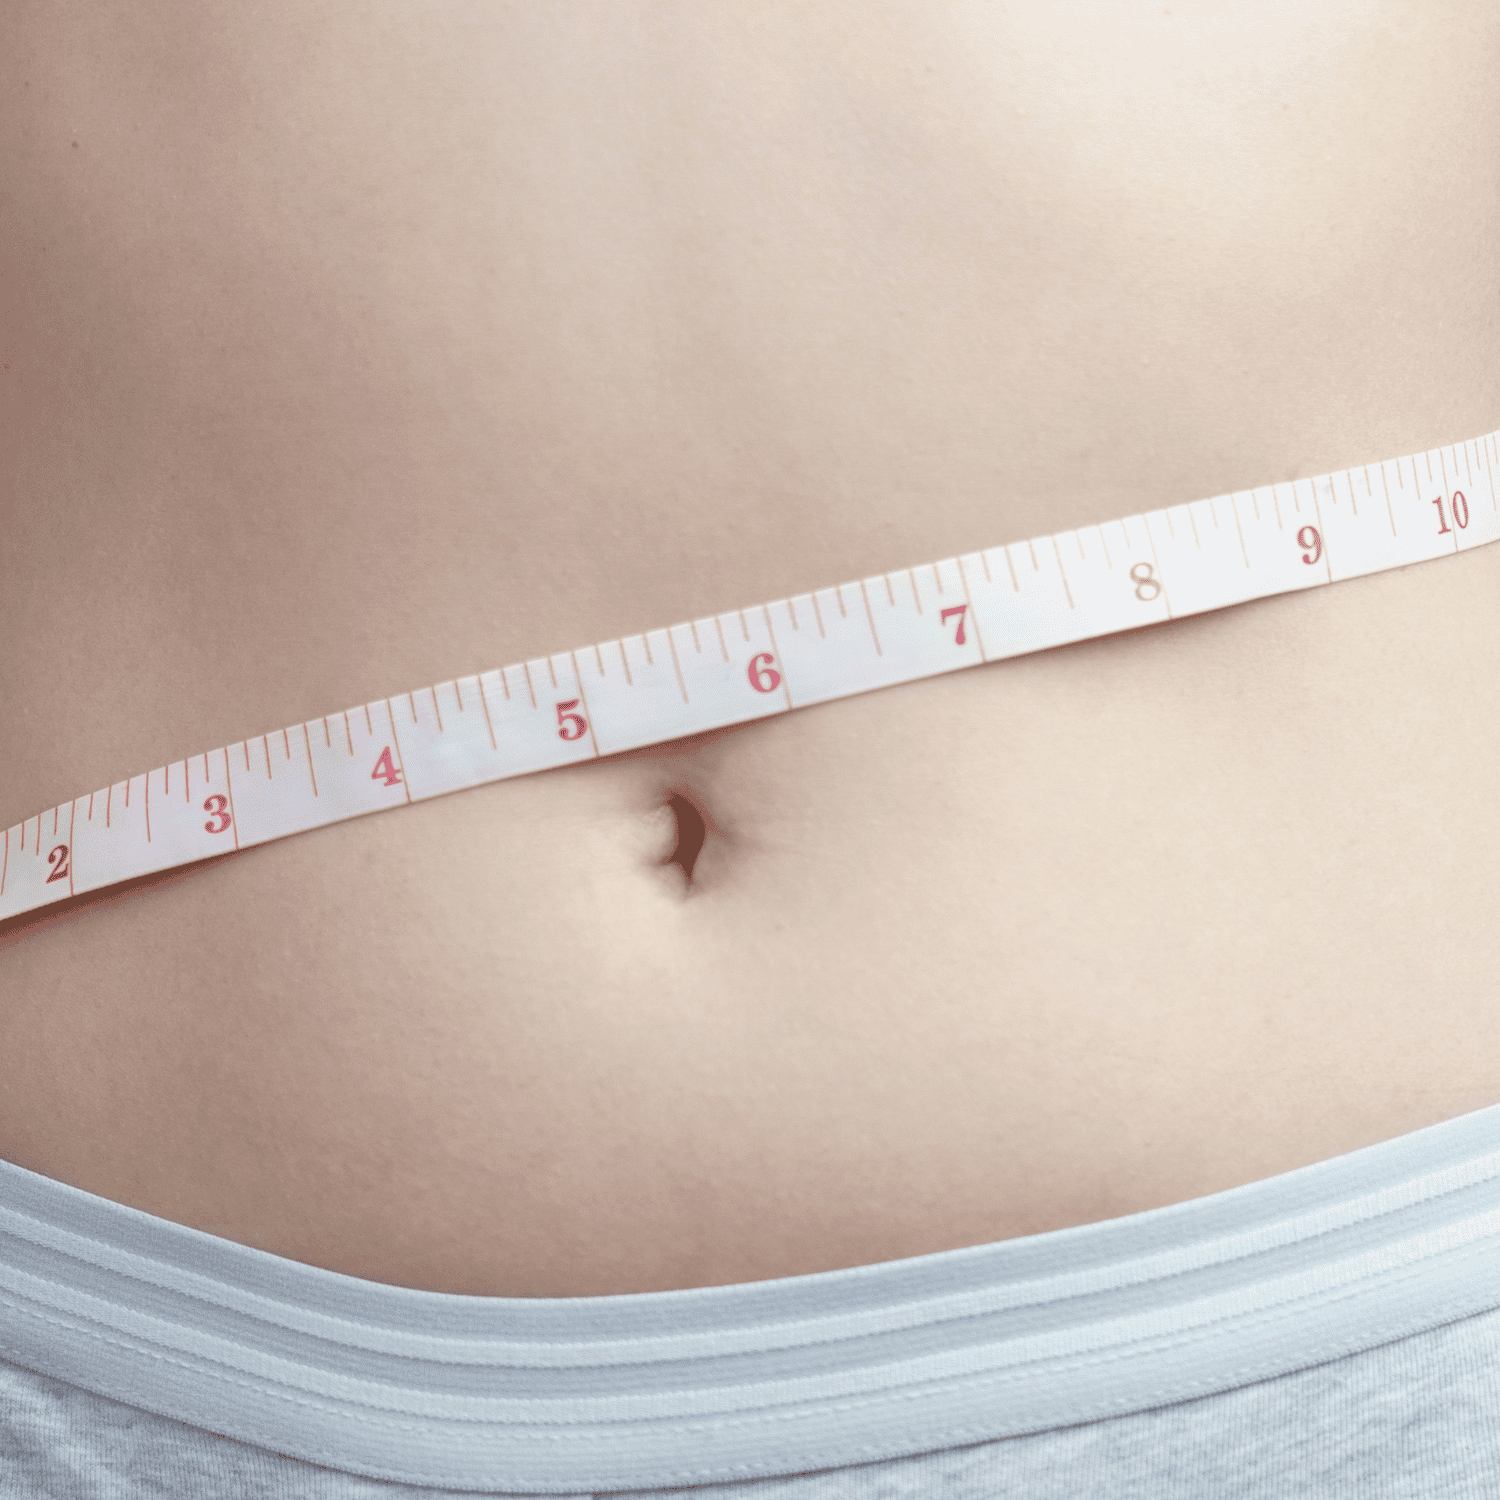 Bariatric Surgery in United States